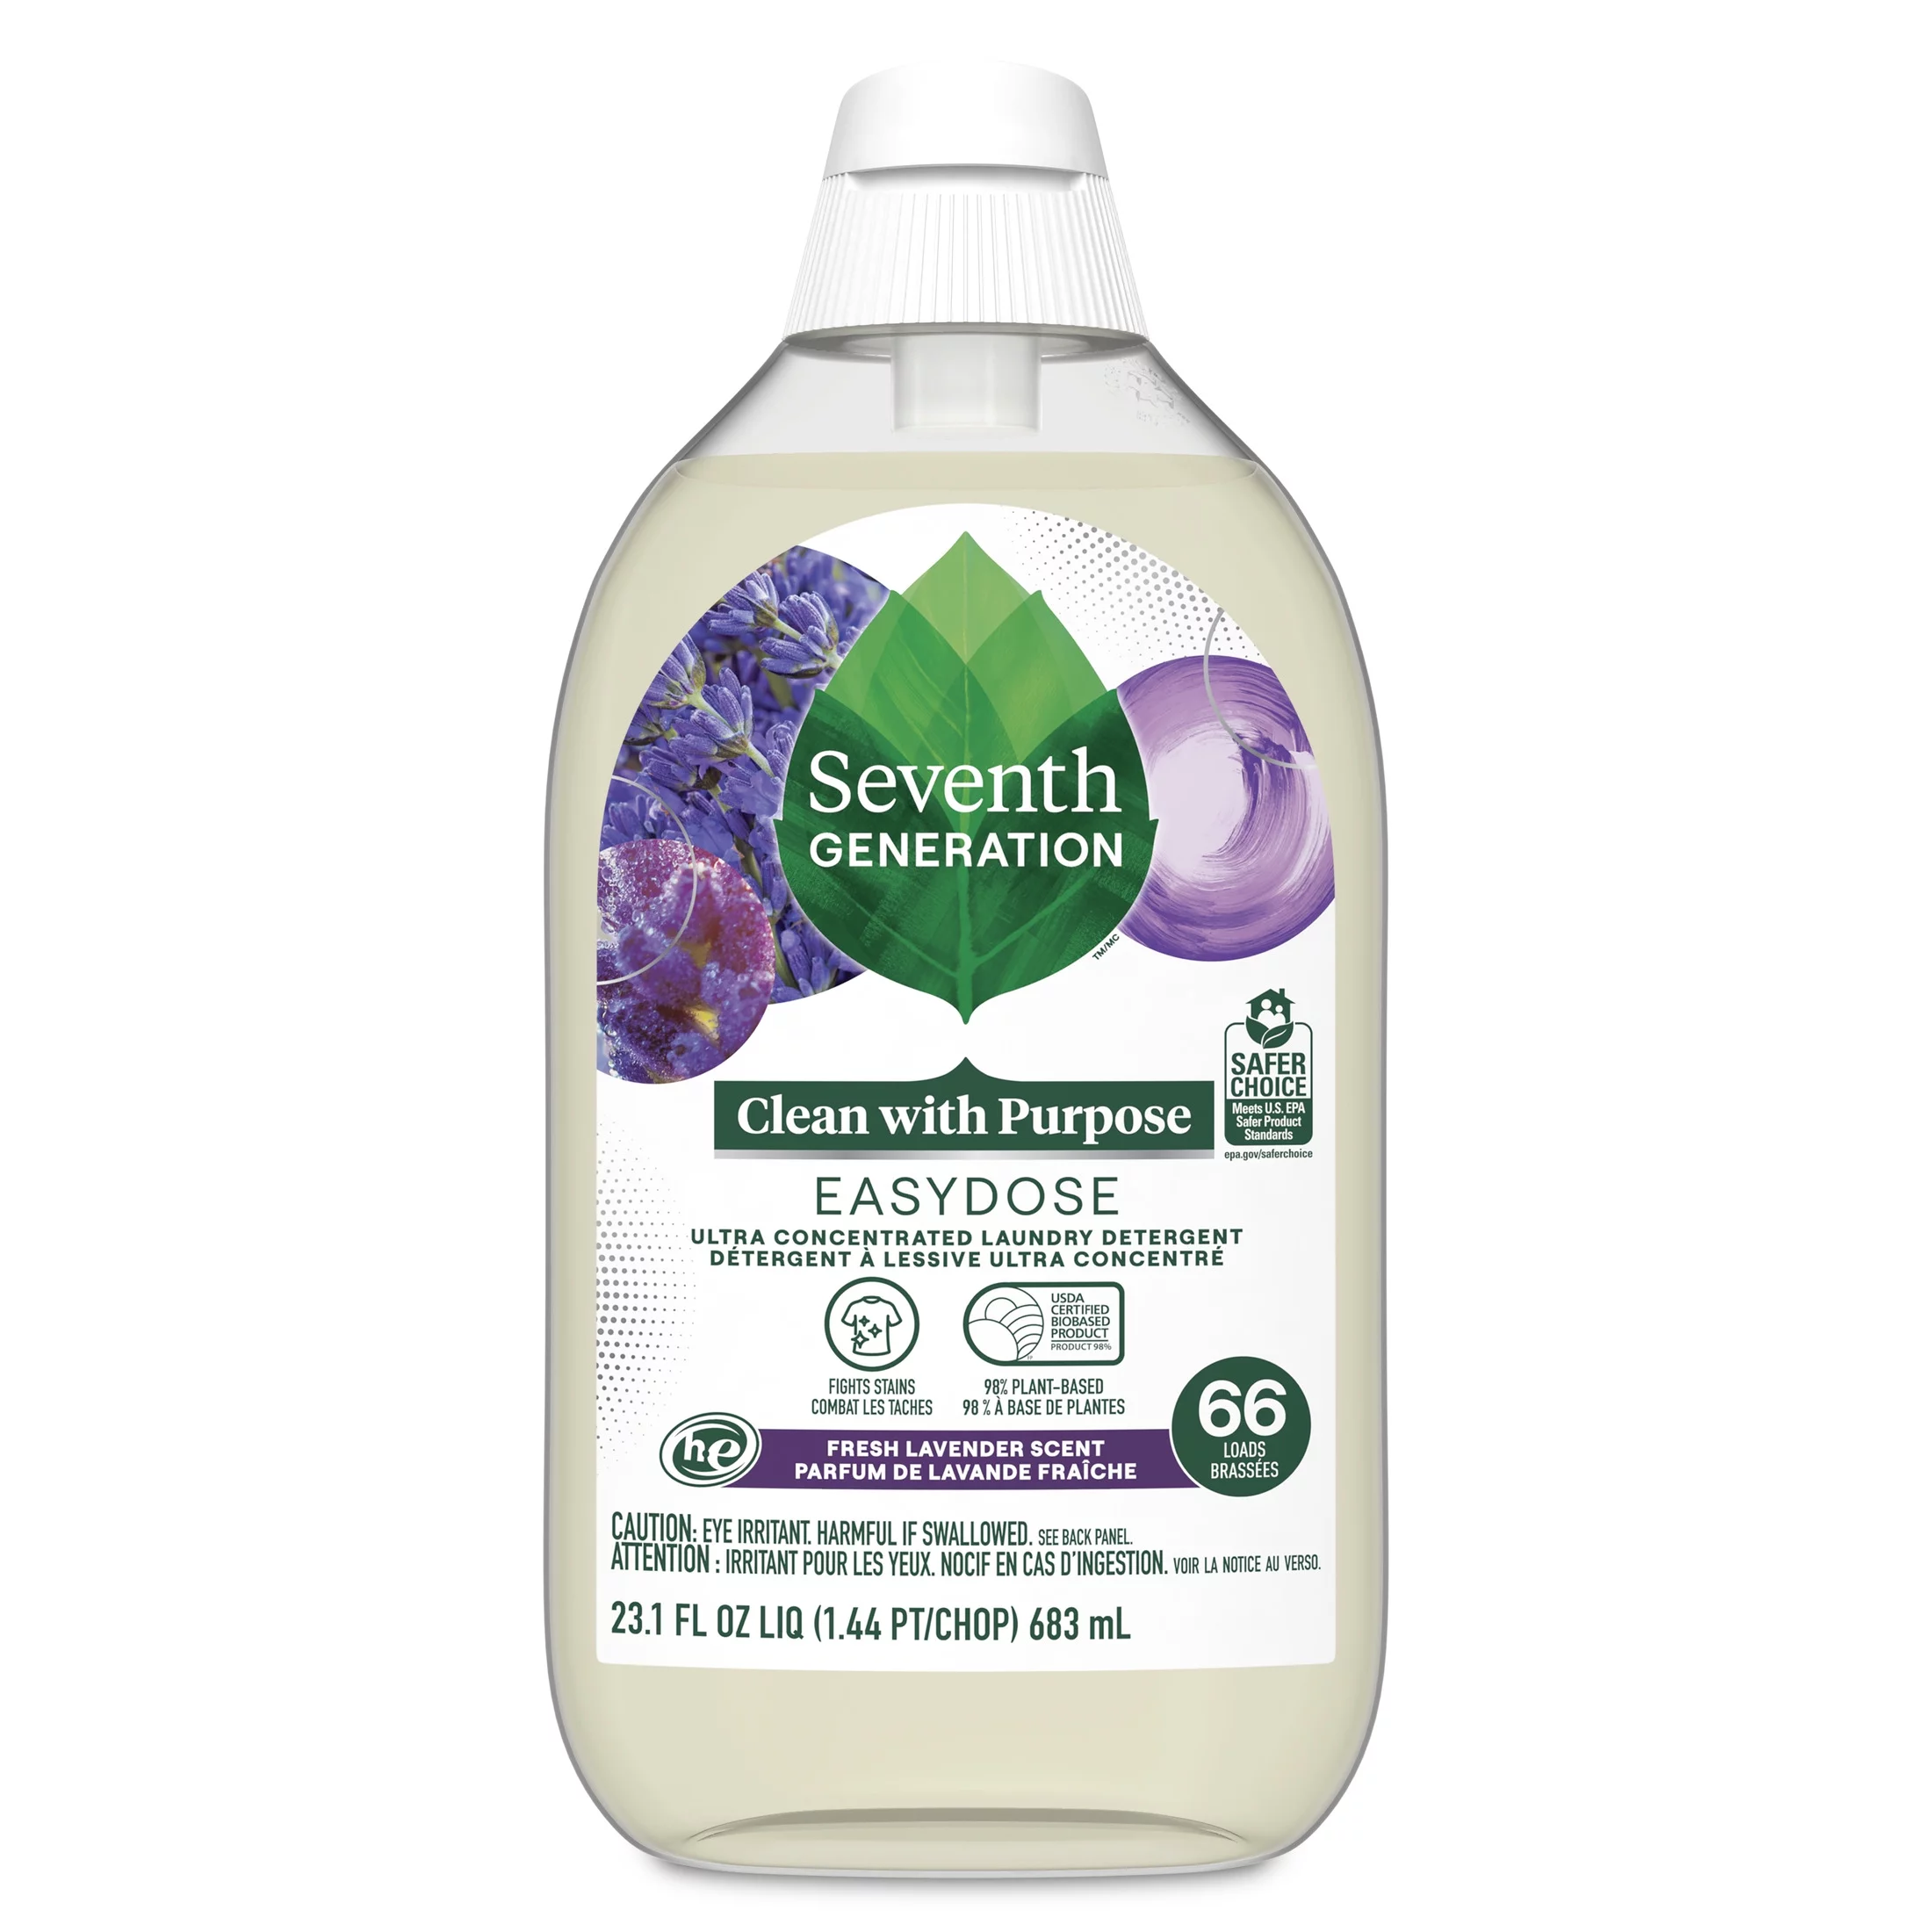 Seventh Generation EasyDose Laundry Detergent Ultra Concentrated Fresh Lavender, 23 oz